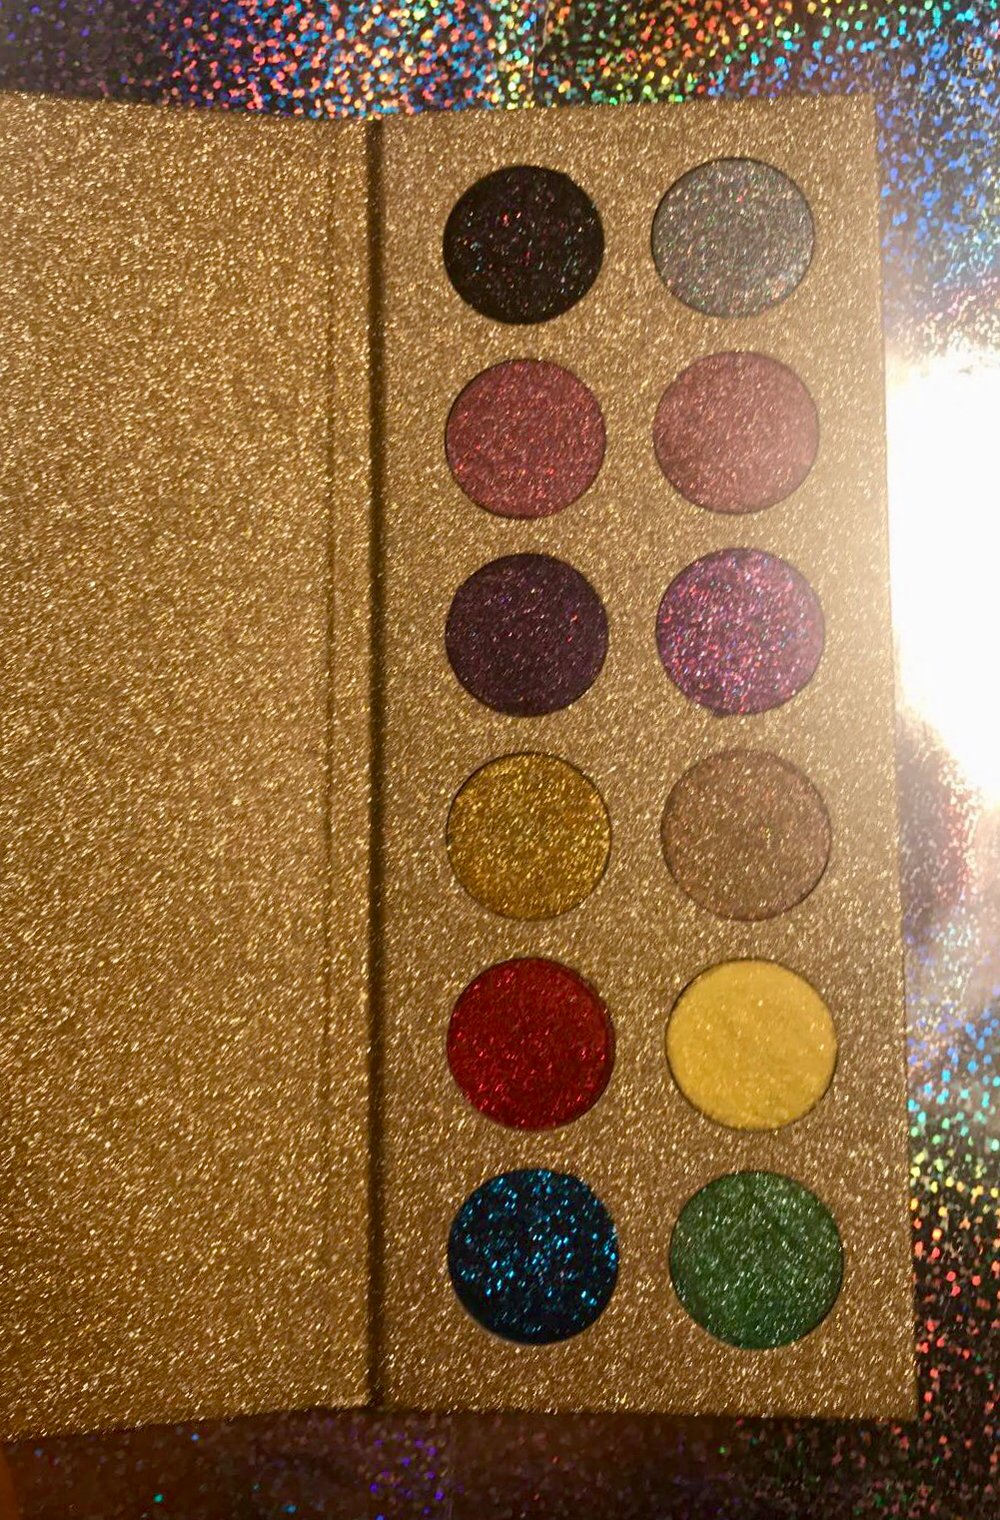 The Love at First Sight Pallet ✨